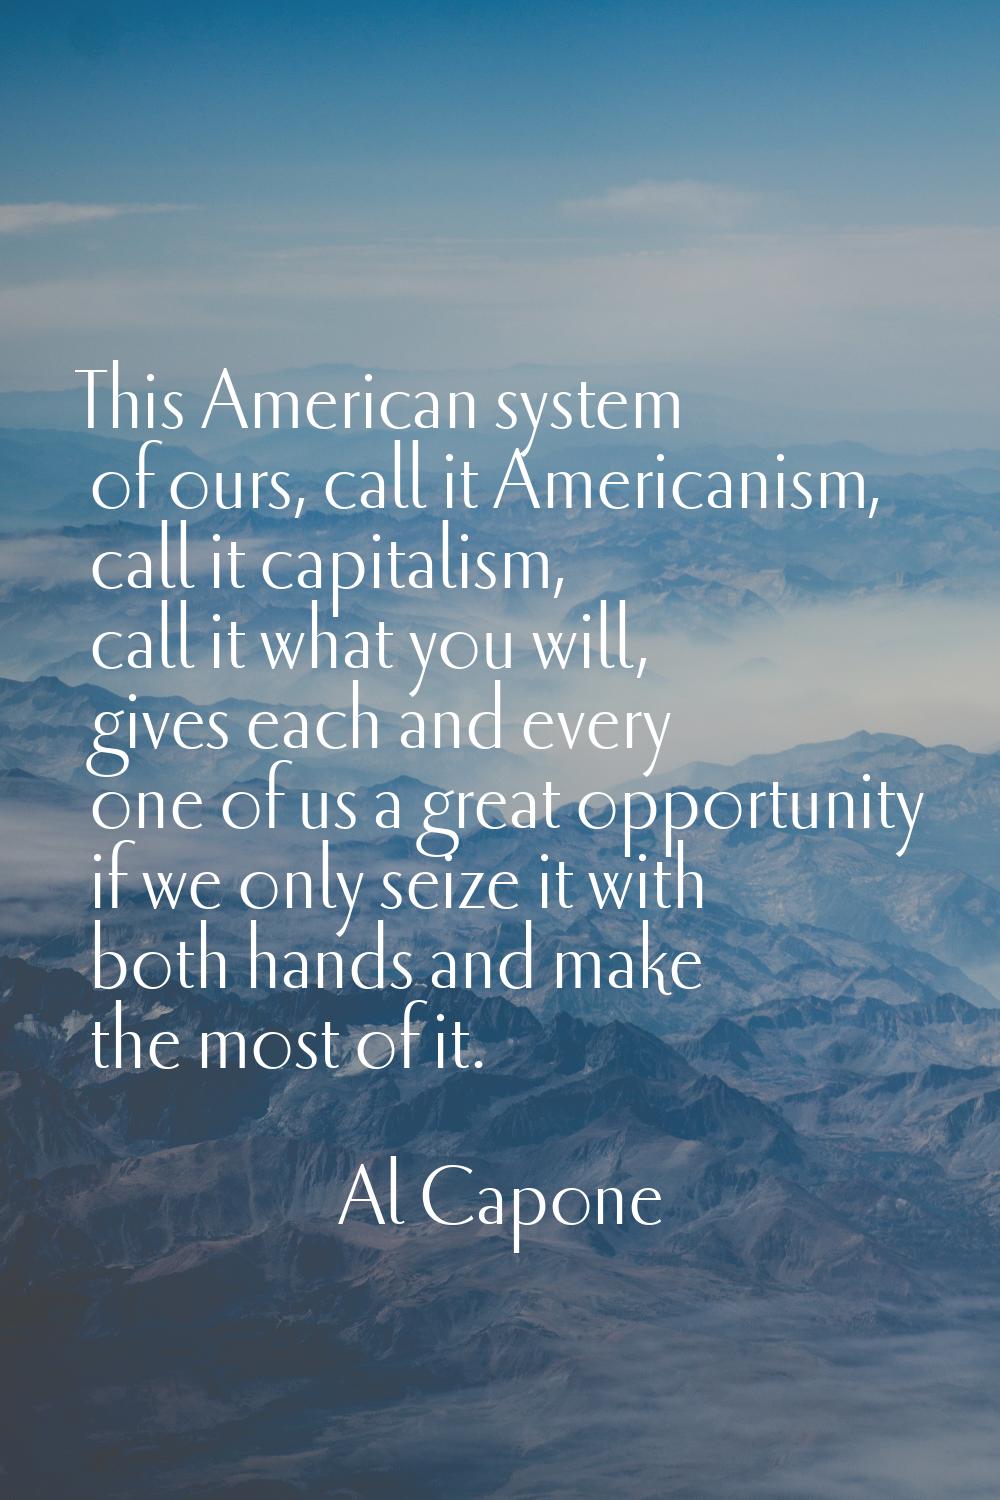 This American system of ours, call it Americanism, call it capitalism, call it what you will, gives